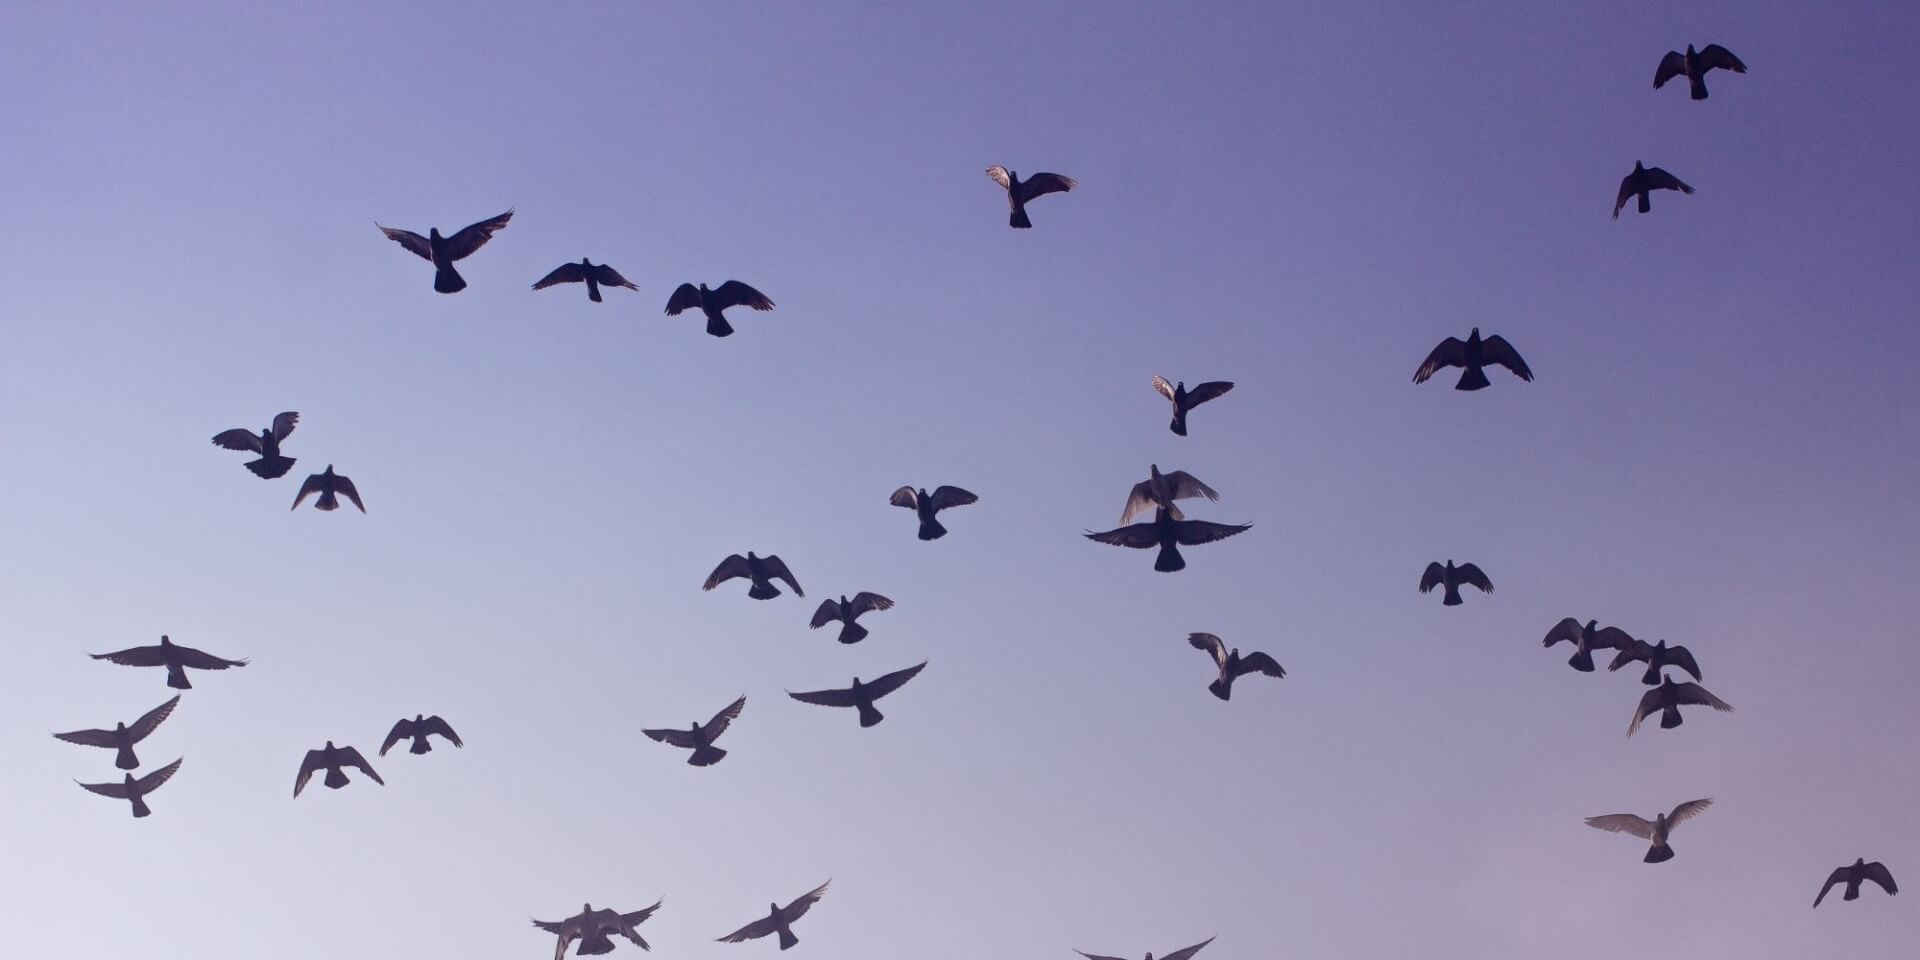 flock of birds flying above with purple sky